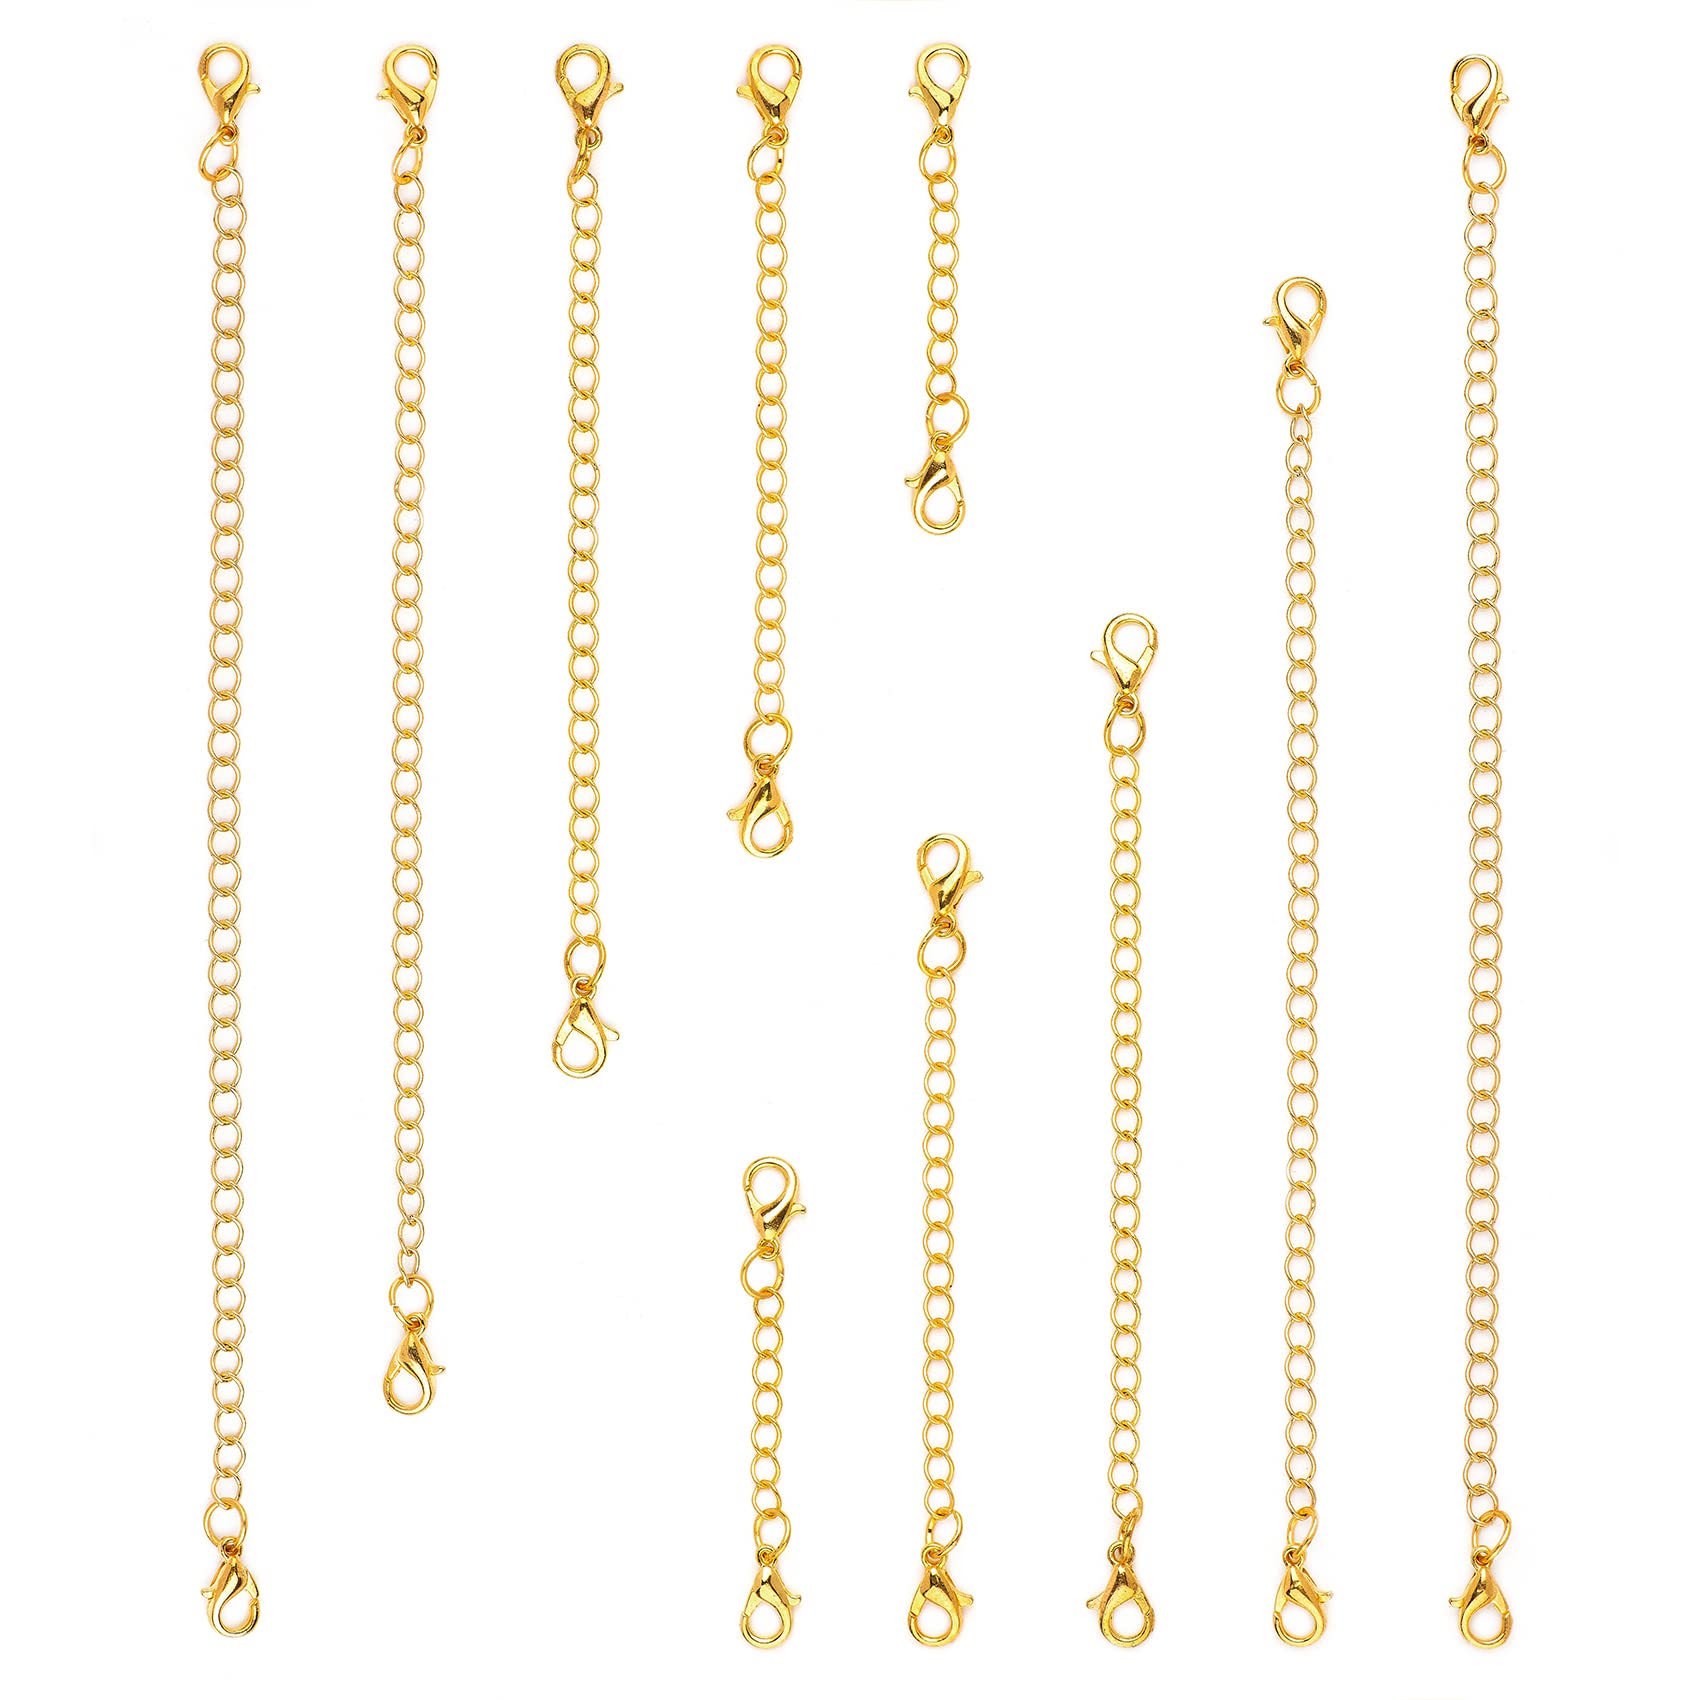 Tiparts 10PcS Necklace Extender with Lobster clasps gold Bracelet Extender  chains Set,Length: 6 4 5 3 2